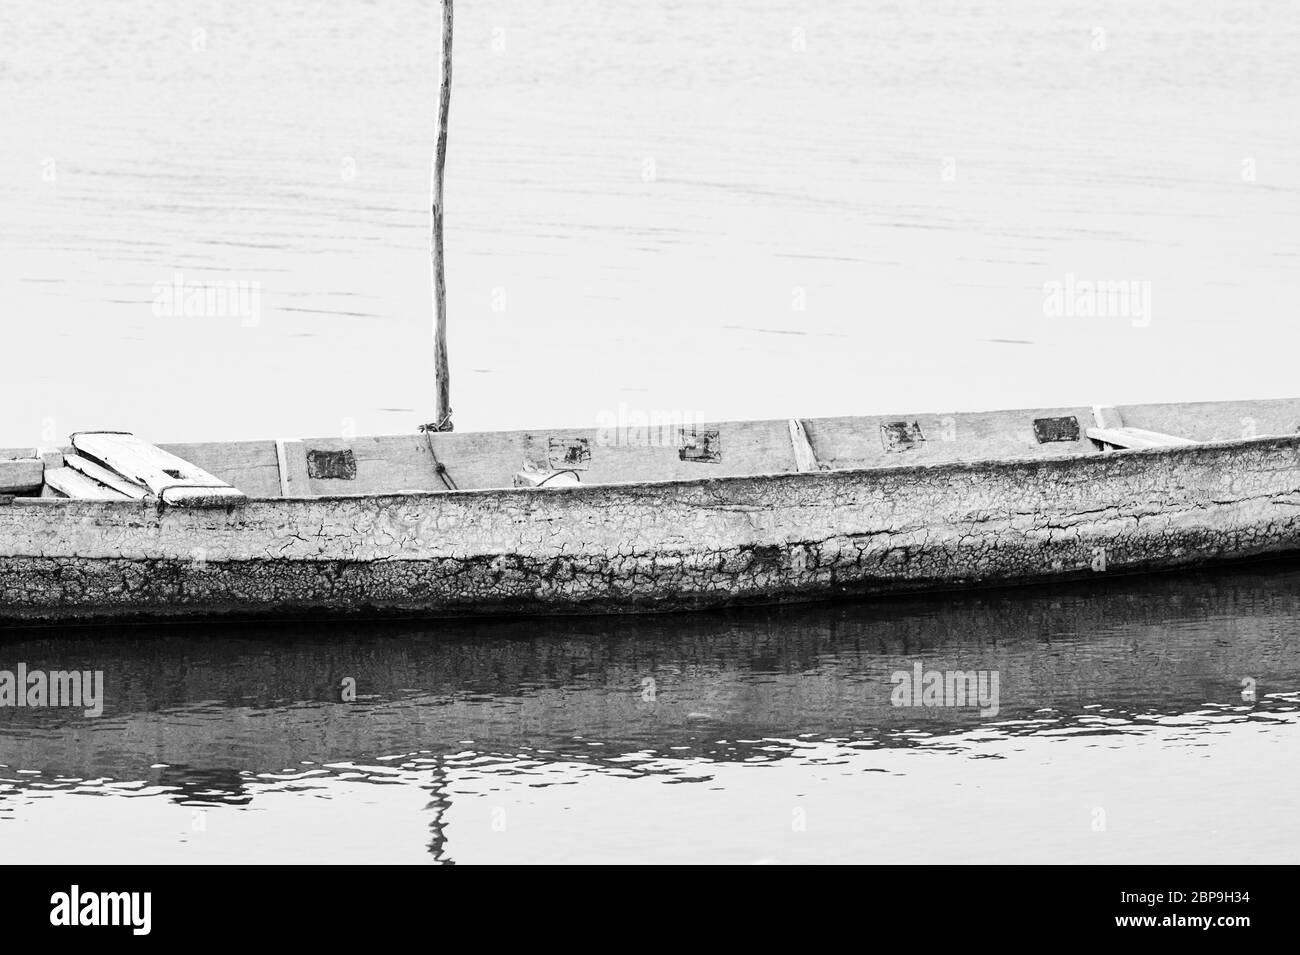 A river boat on the Mekong River. Ko Pen, Cambodia, Southeast Asia Stock Photo